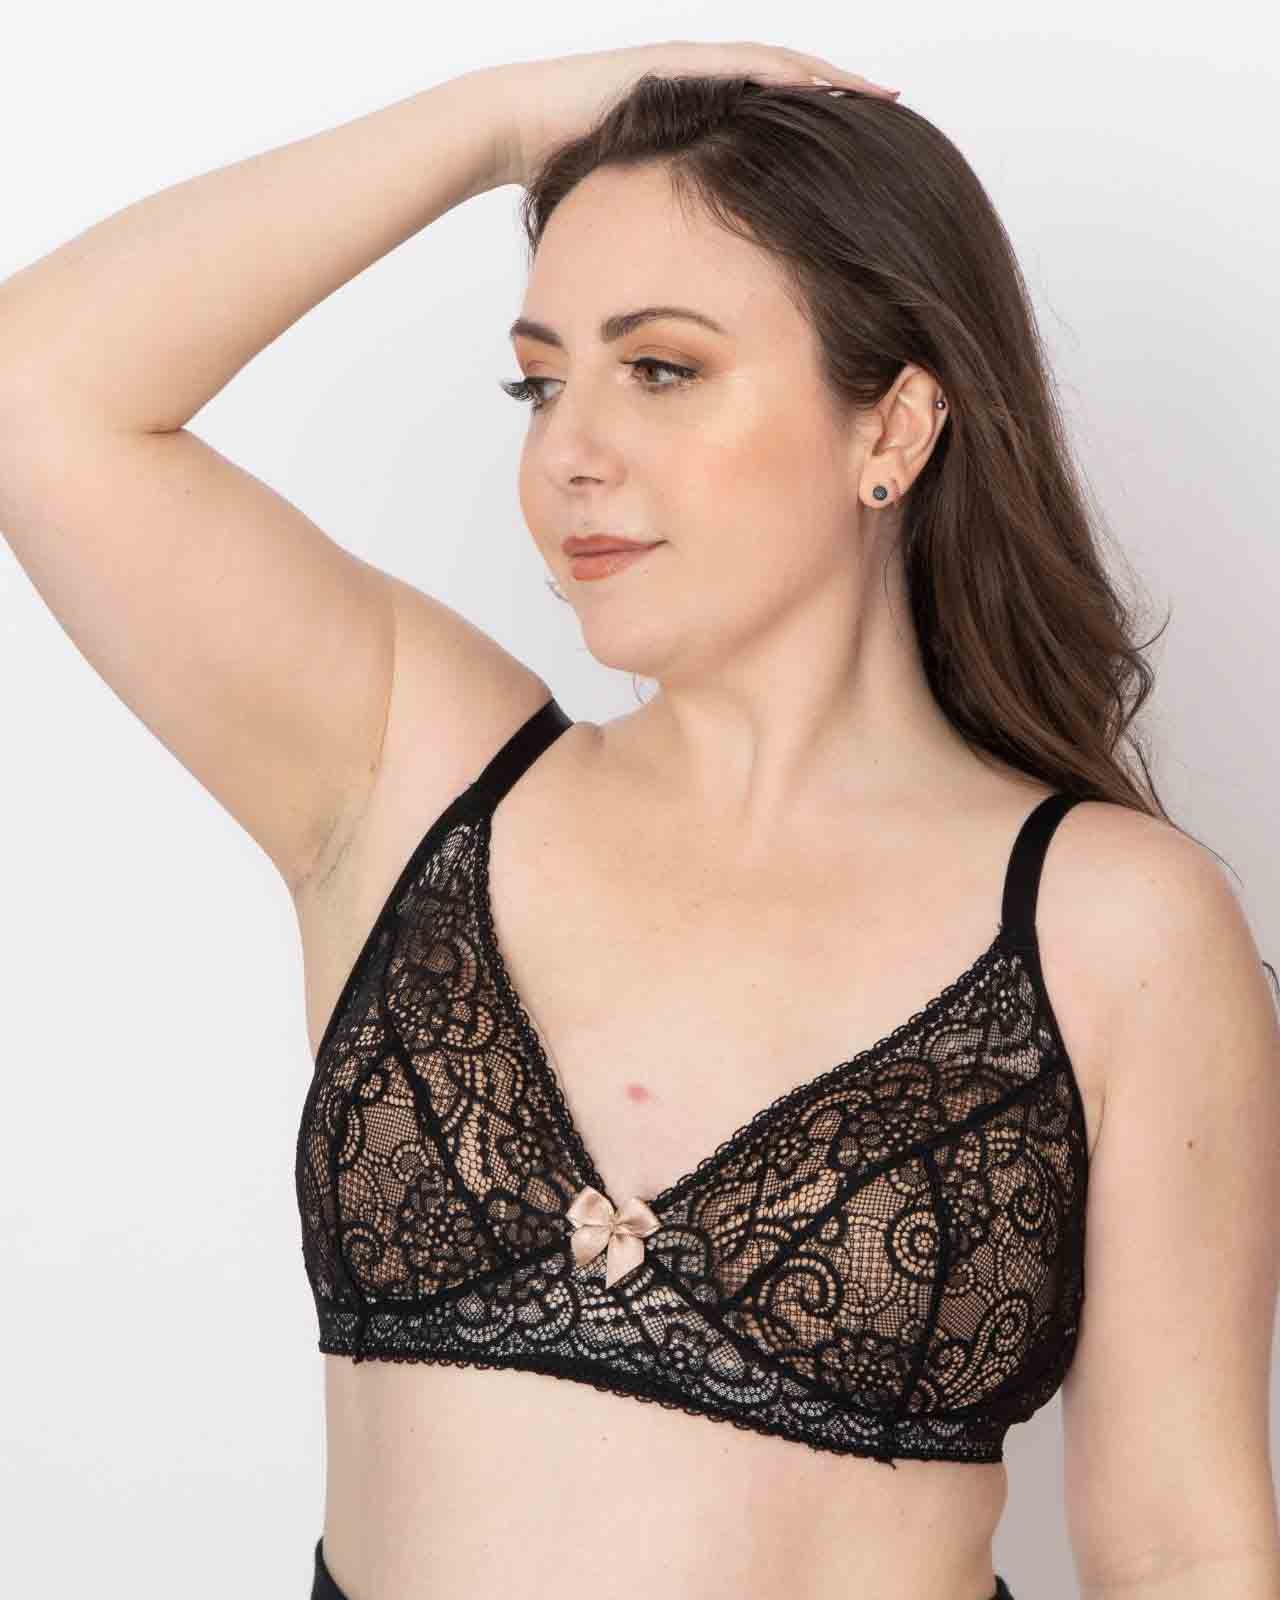 Yes, your mastectomy bra can be - Knickers 'n Lace